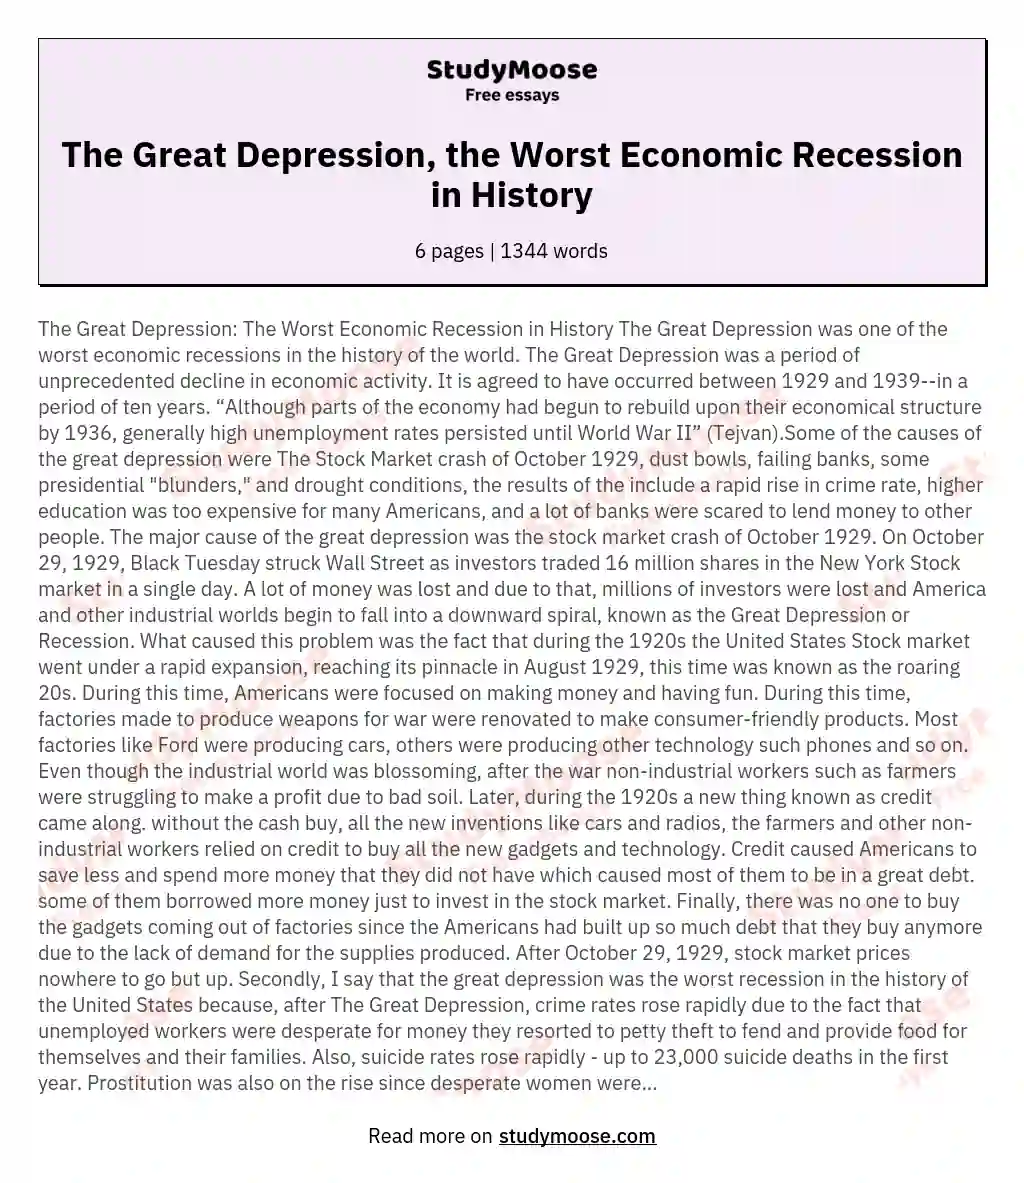 The Great Depression, the Worst Economic Recession in History essay